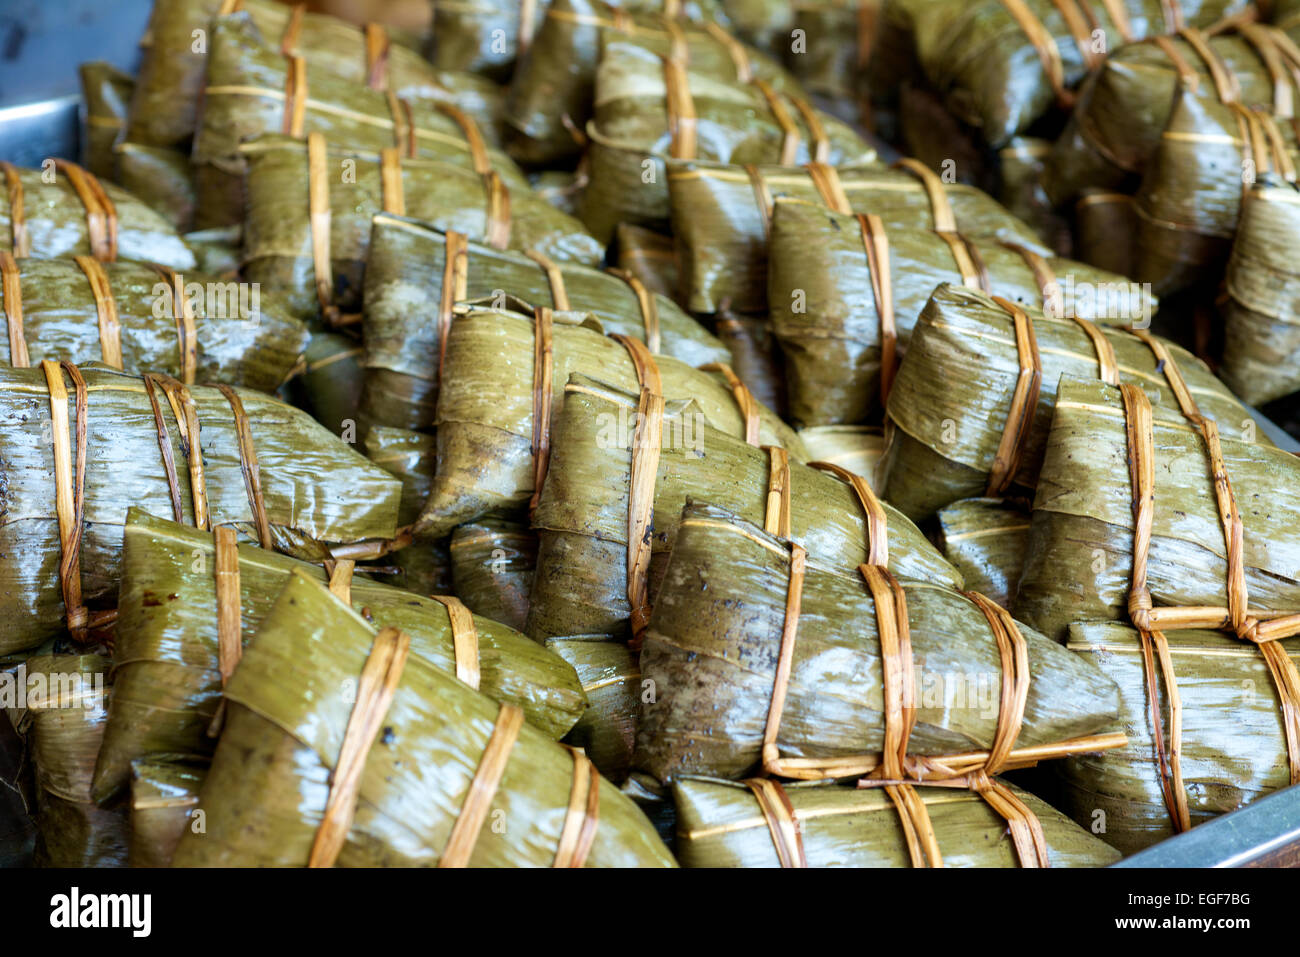 Chinese Zongli rice dumplings wrapped in leaves Stock Photo